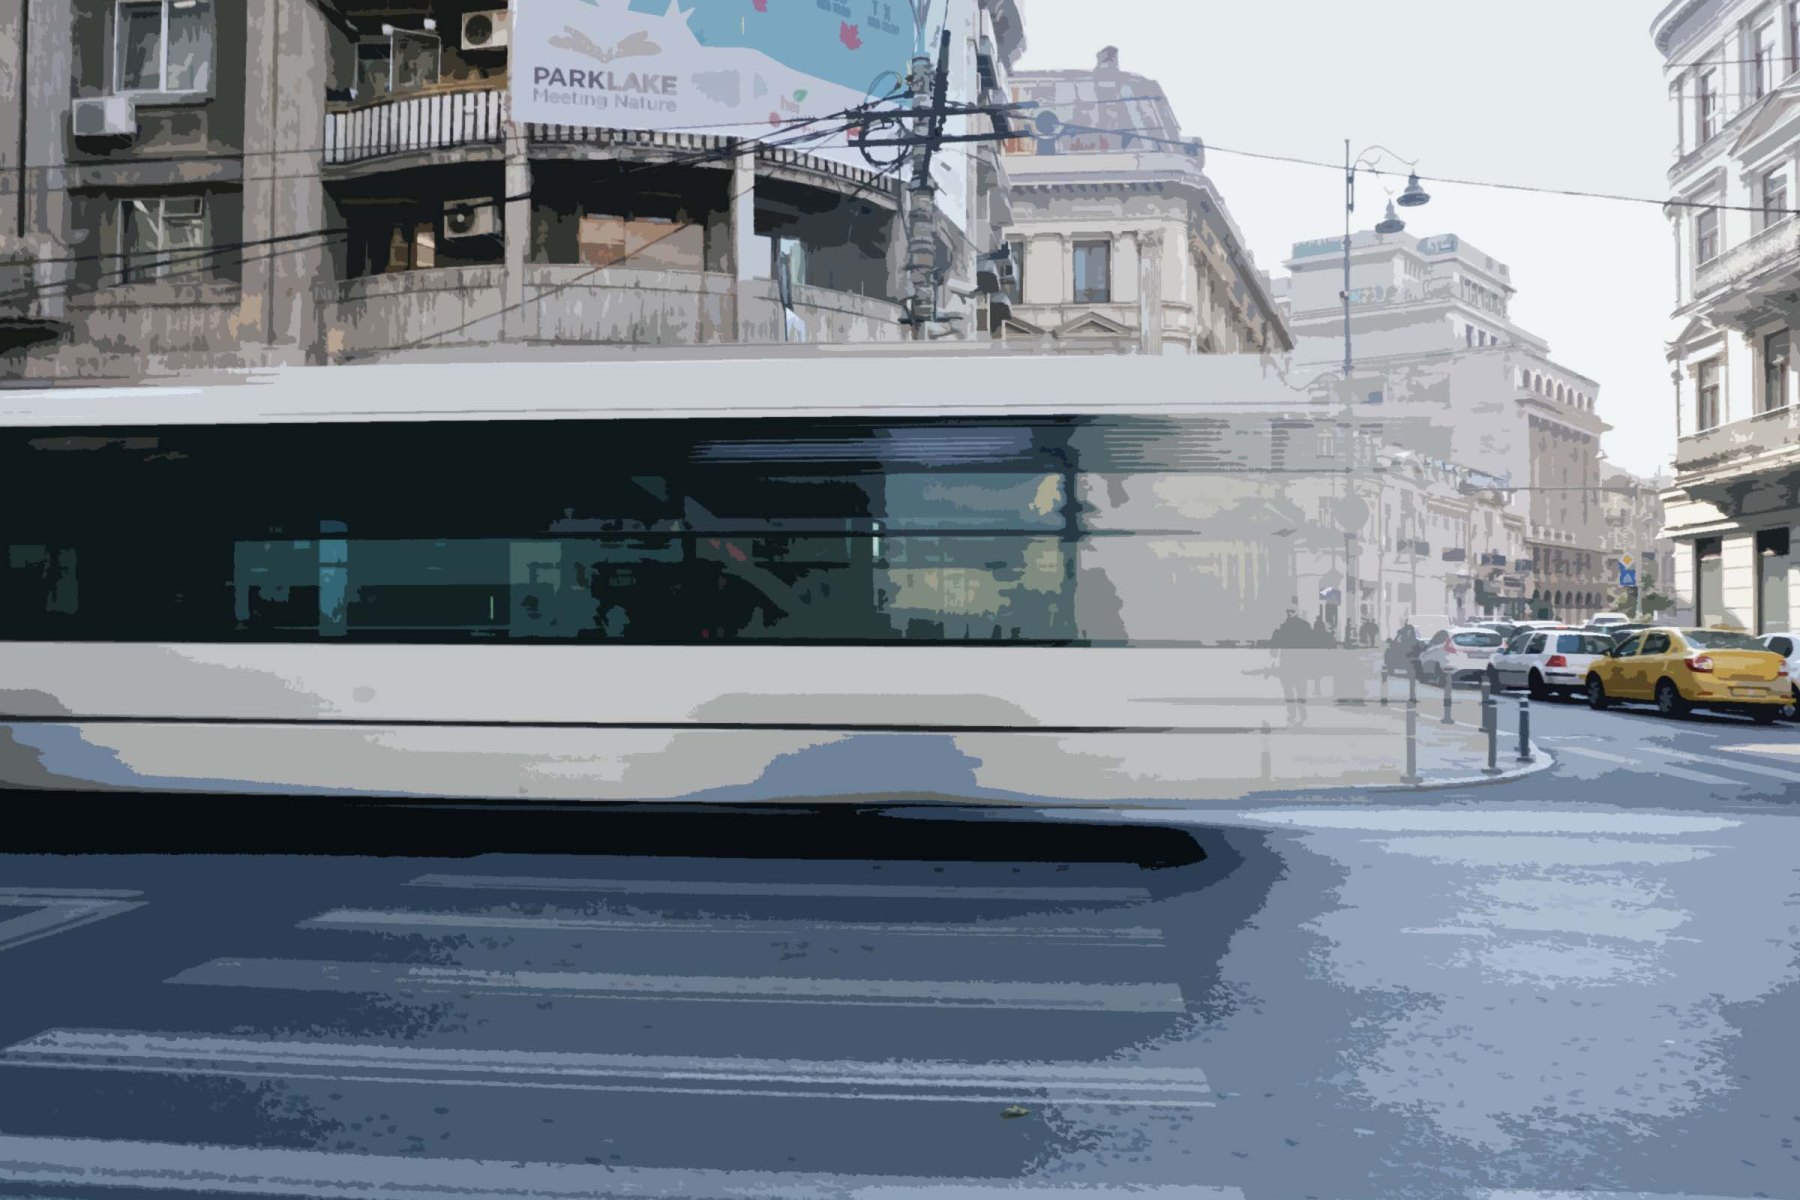 Image of Bucharest, Romania. A large white bus drives past in a whirl and large buildings are in the background. The street in the foreground are empty, and one man looks transparent and diminutive in the background